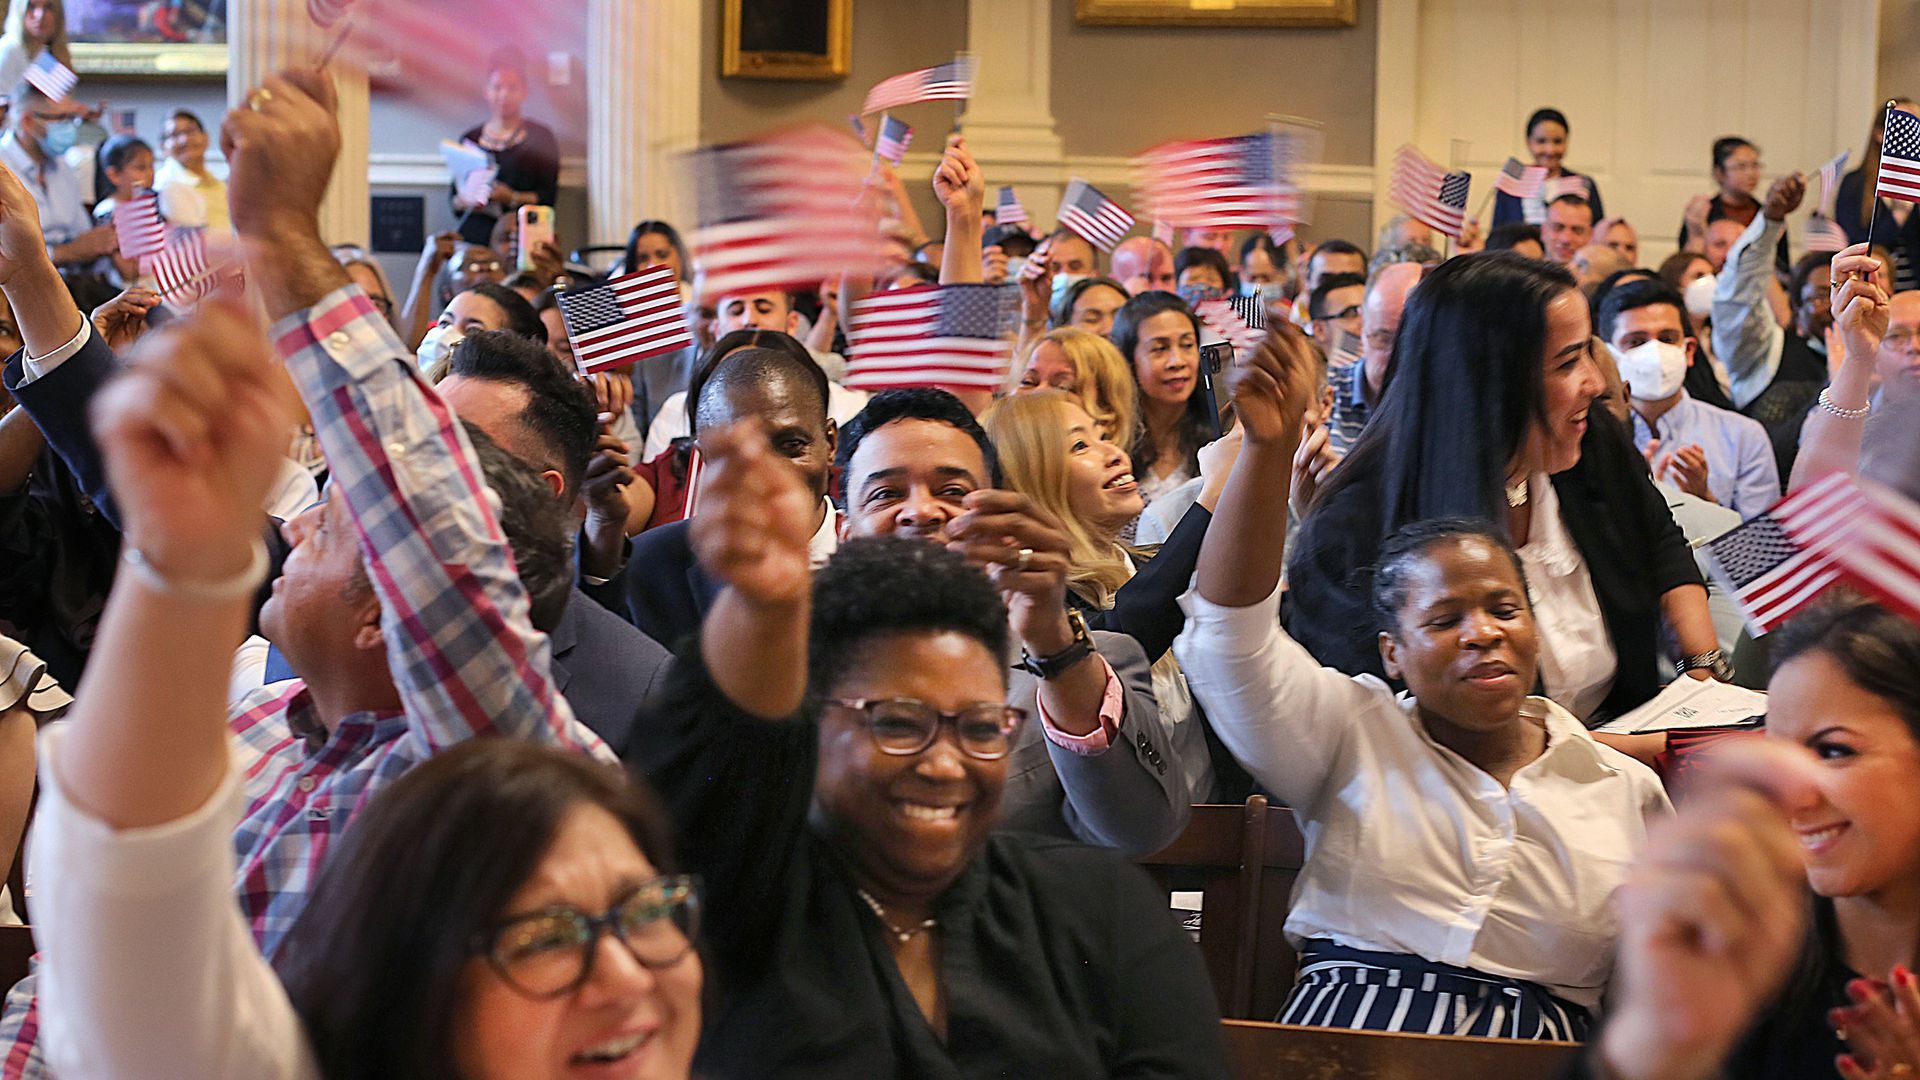 Naturalized citizens waving American flag